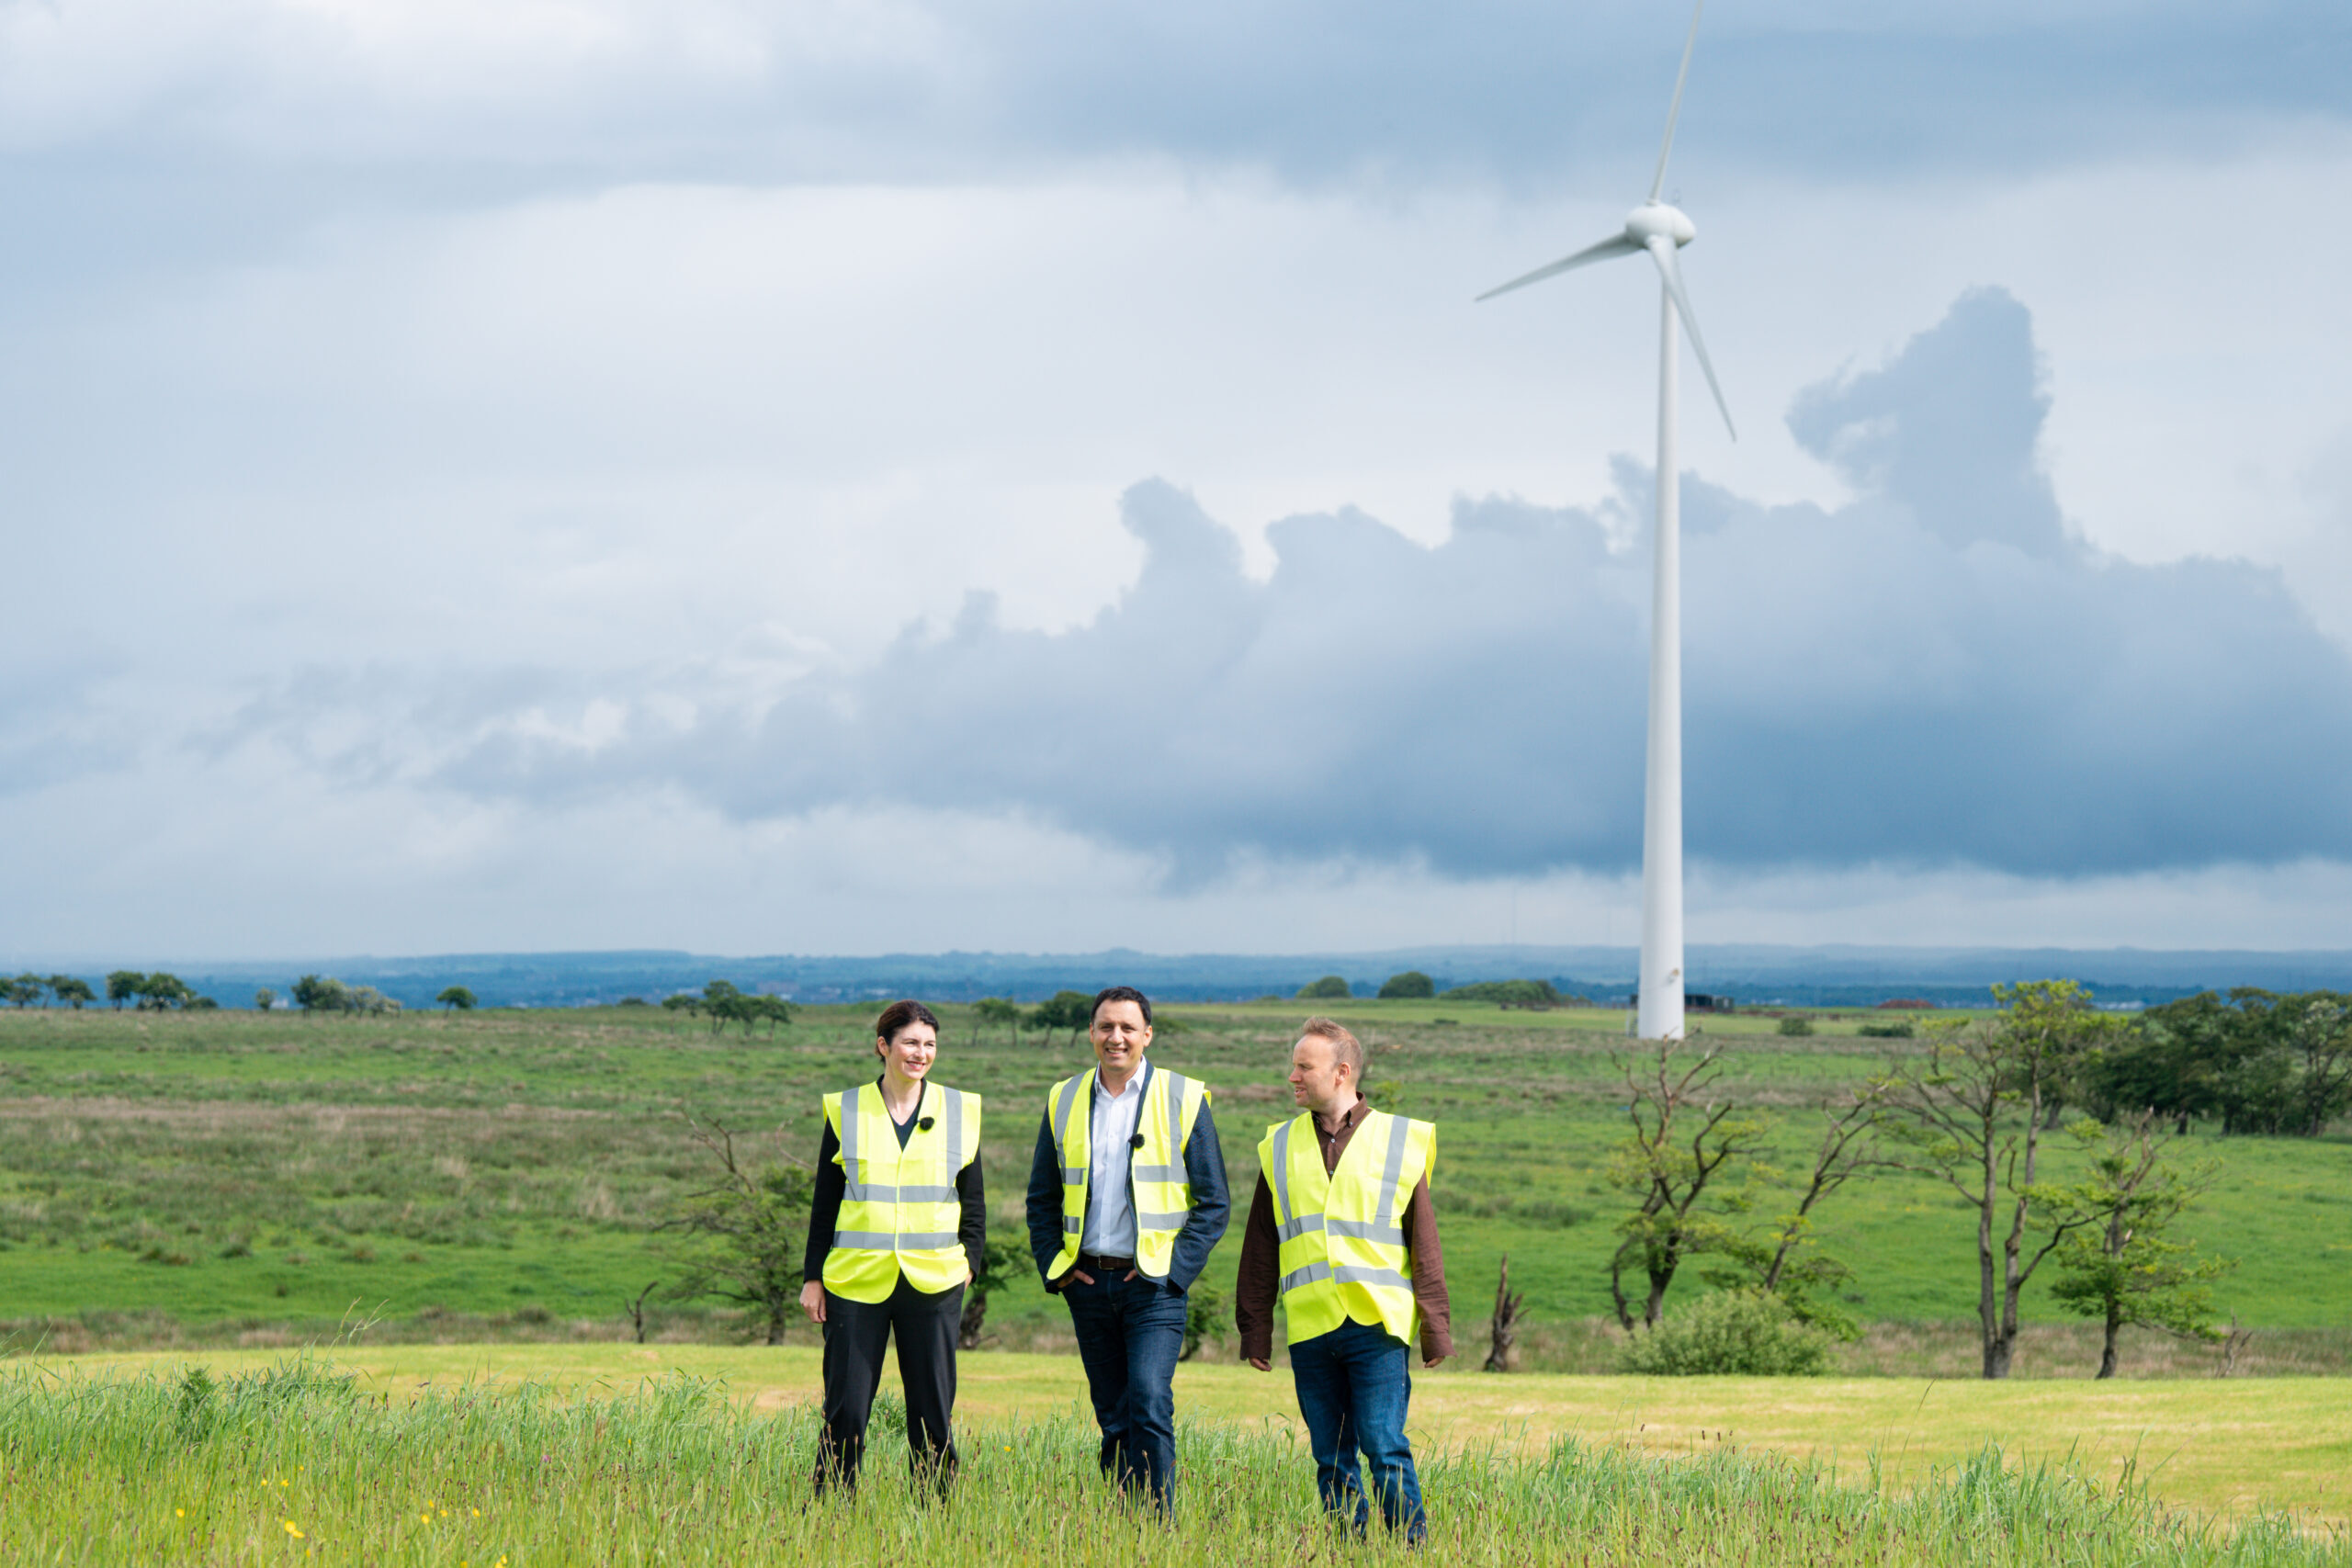 Anas Sarwar and two people standing in a field in front of a wind turbine